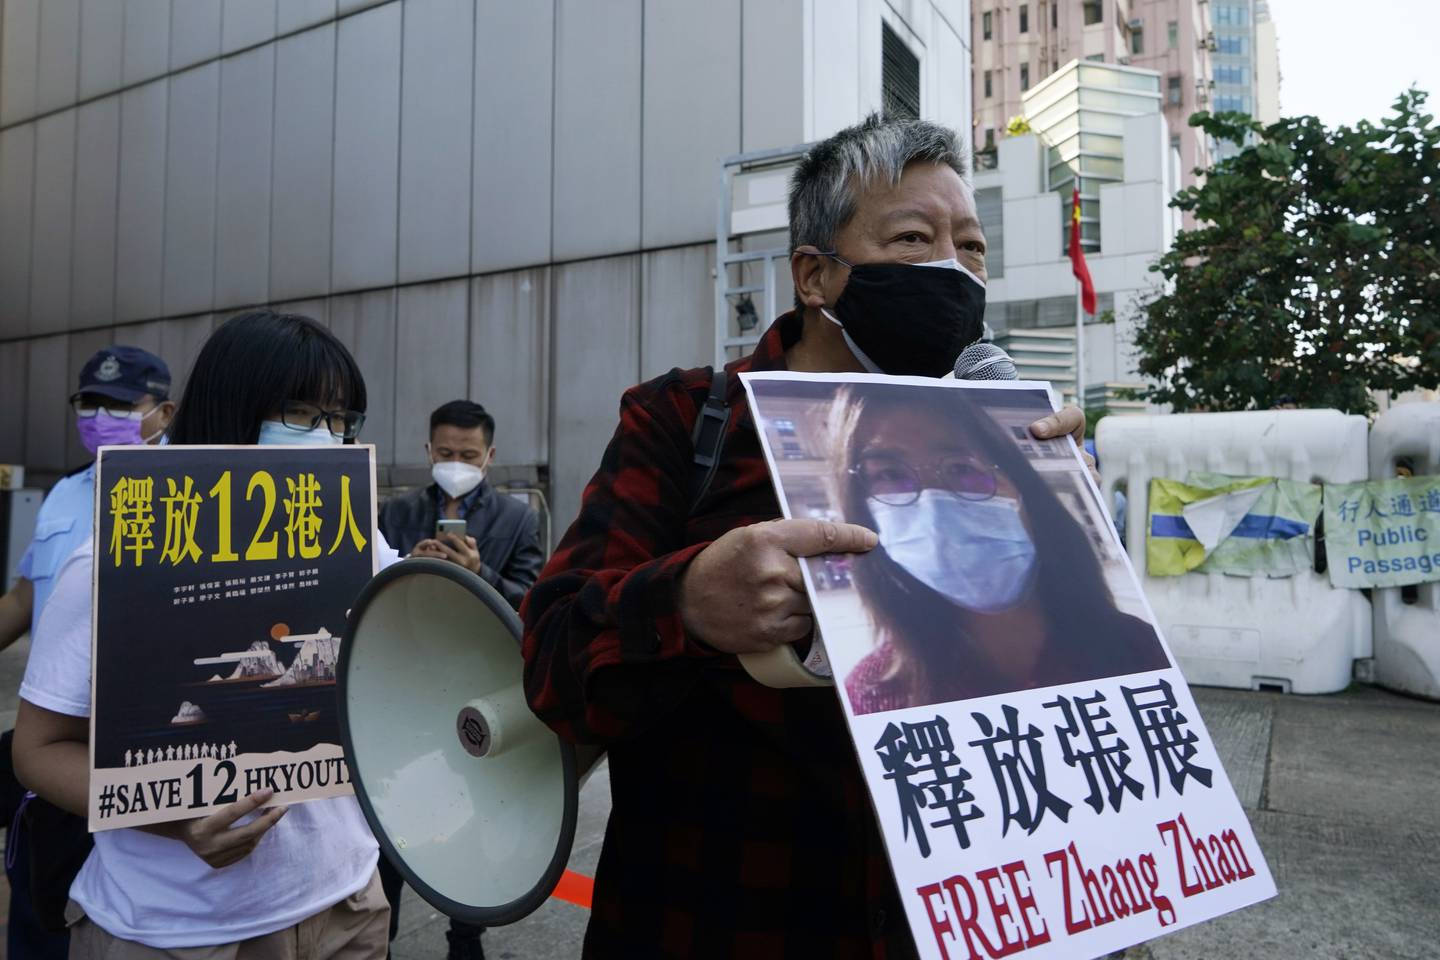 Pro-democracy activists, including Lee Cheuk-Yan, right, hold placards with the picture of Chinese citizen journalist Zhang Zhan as they march to the Chinese central government's liaison office, in Hong Kong, Monday, Dec. 28, 2020. Zhang, a former lawyer and citizen journalist from Shanghai, has been sentenced to four years in prison for her reporting on the initial coronavirus outbreak in Wuhan, China. The activists demanded the releases of Zhang, as well as the 12 Hong Kong activists detained at sea by Chinese authorities. (AP Photo/Kin Cheung)